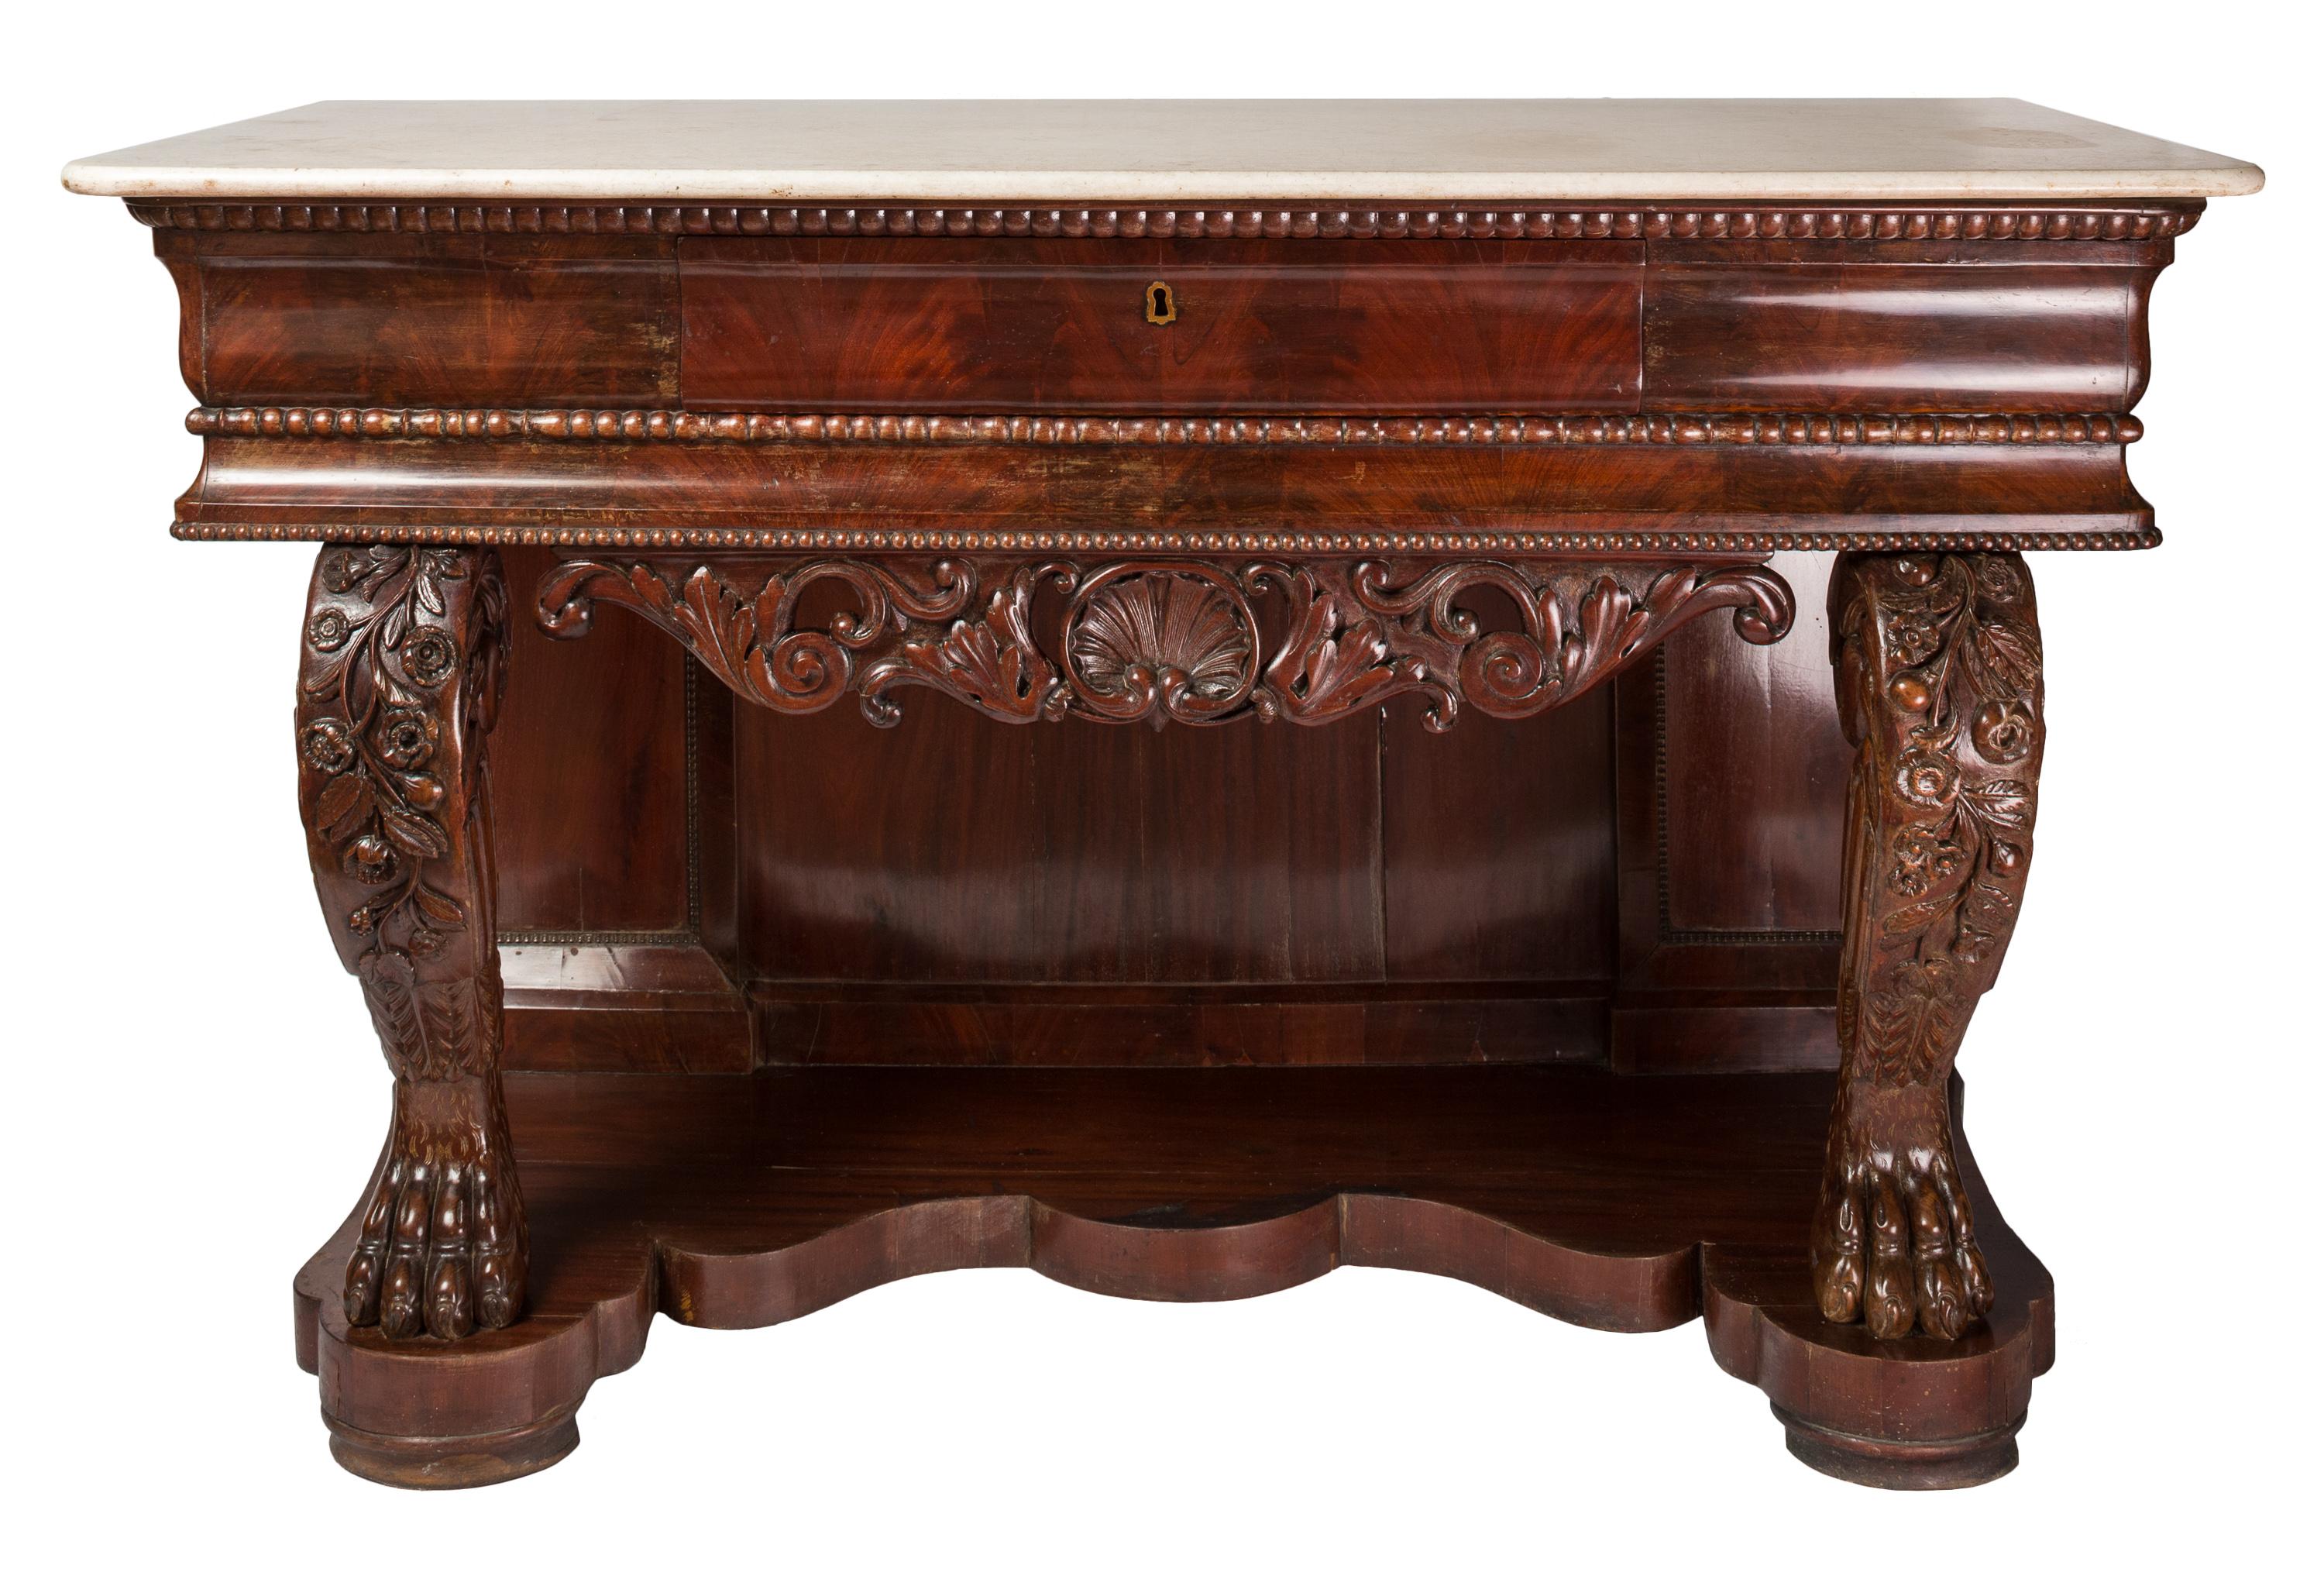 19th Century French Charles X style hardwood console table, with rectangular white marble top over a conforming frieze with single locking drawer, raised on muscular scrolled cabriole legs ending in claw feet standing on an undulate base. The